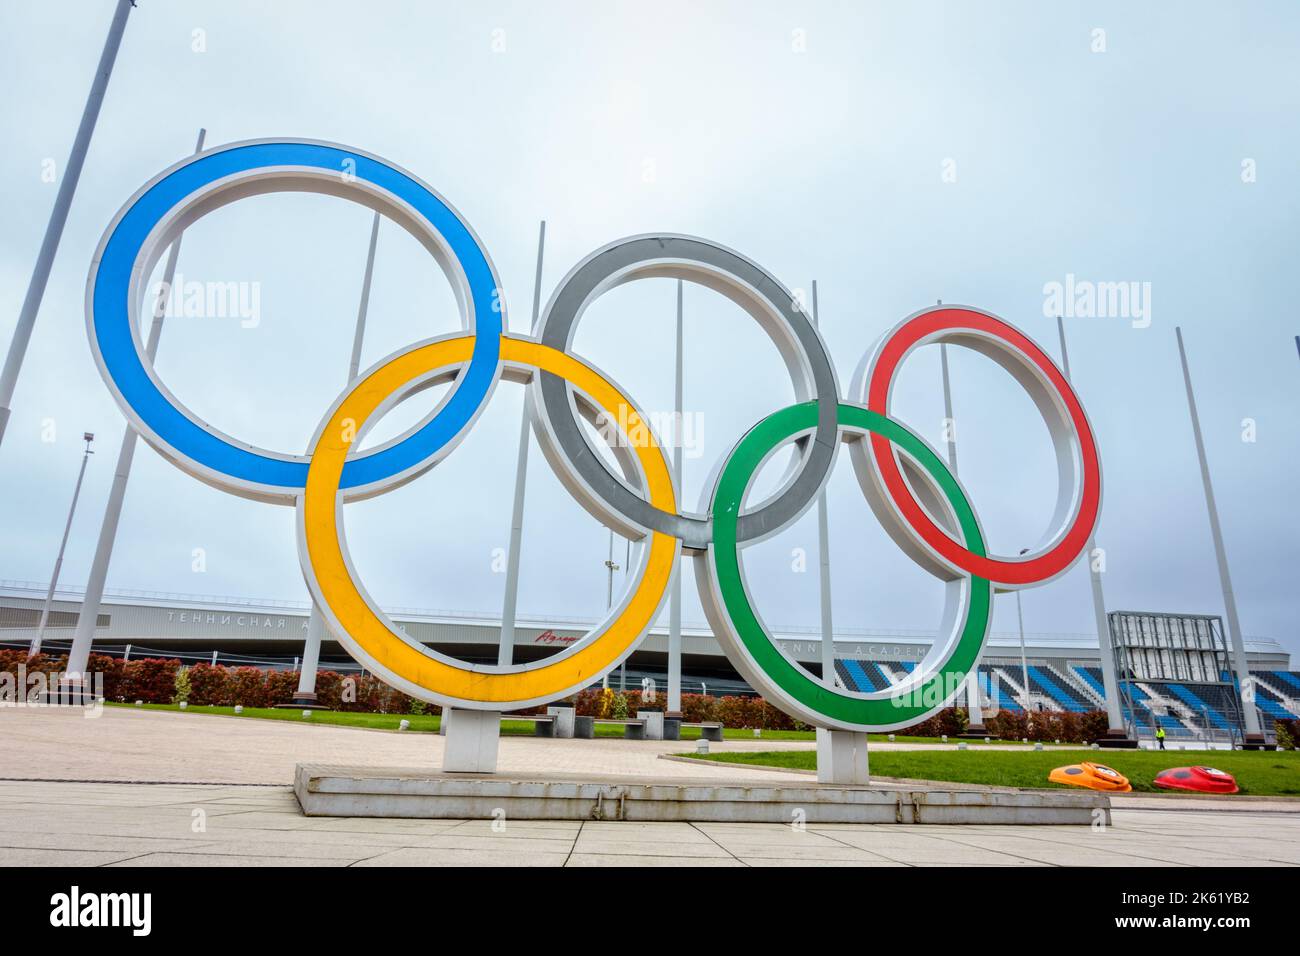 Sochi, Adler, Russia, April 14, 2016: Olymic Rings sculpture in Olympic Park in Sochi after the Winter Olympics of 2015 Stock Photo